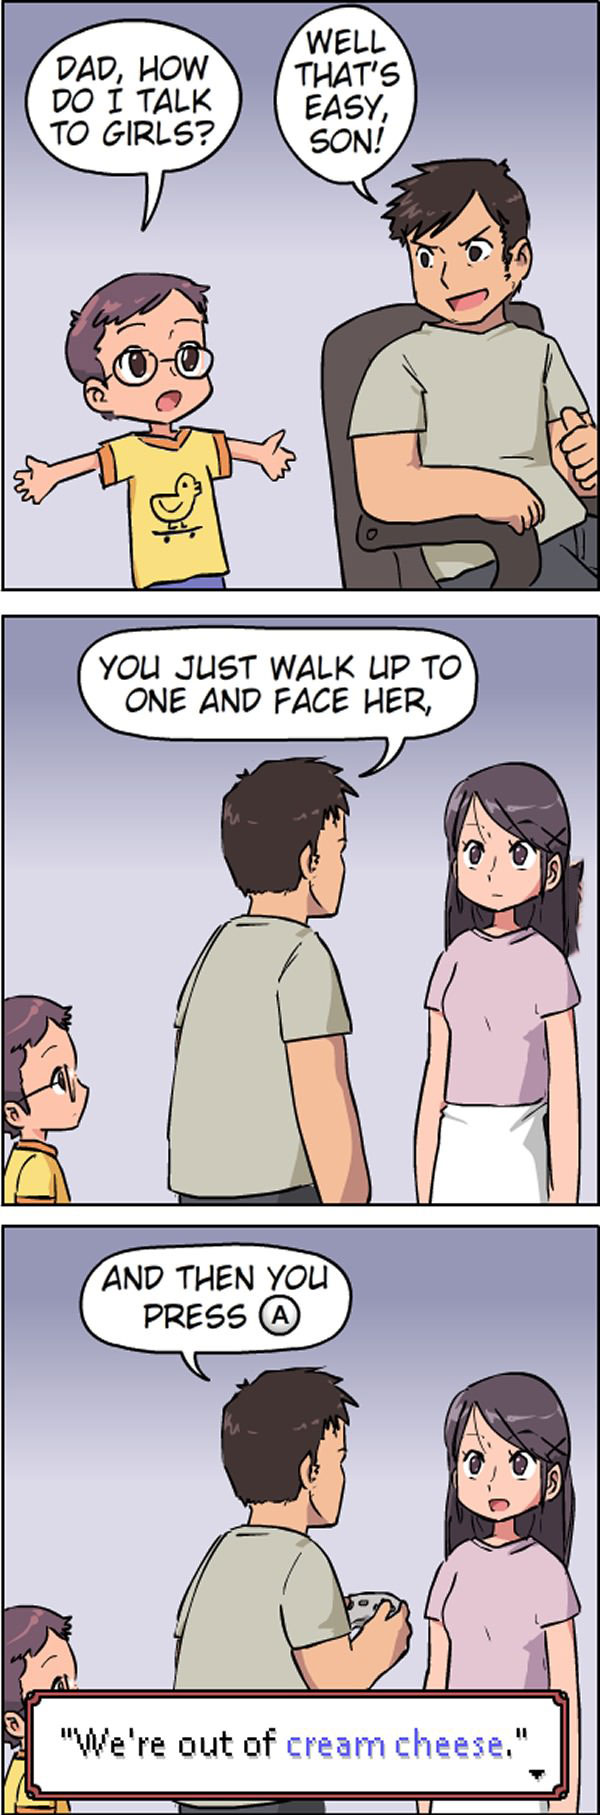 dad how do i talk to girls, well that's easy son, you just walk up to one and face her, then you press a, we're out of cream cheese, comic, video game logic